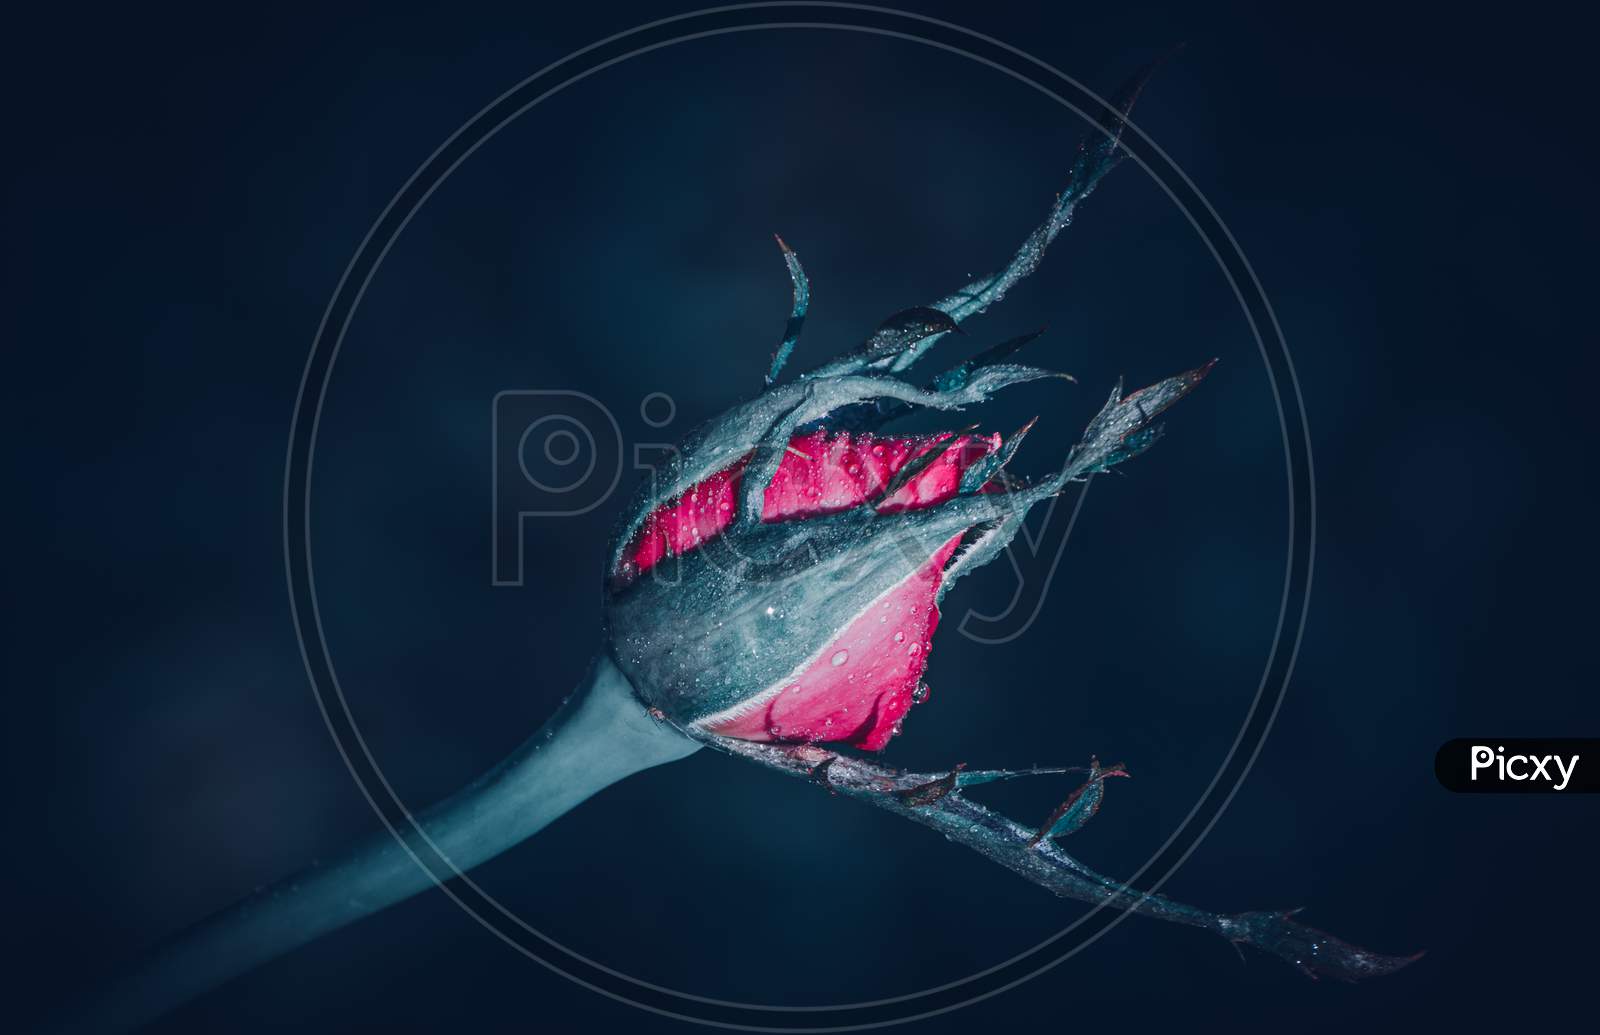 Pink Rose Bud And Long Sepals Close Up Photograph In A Dark Background.